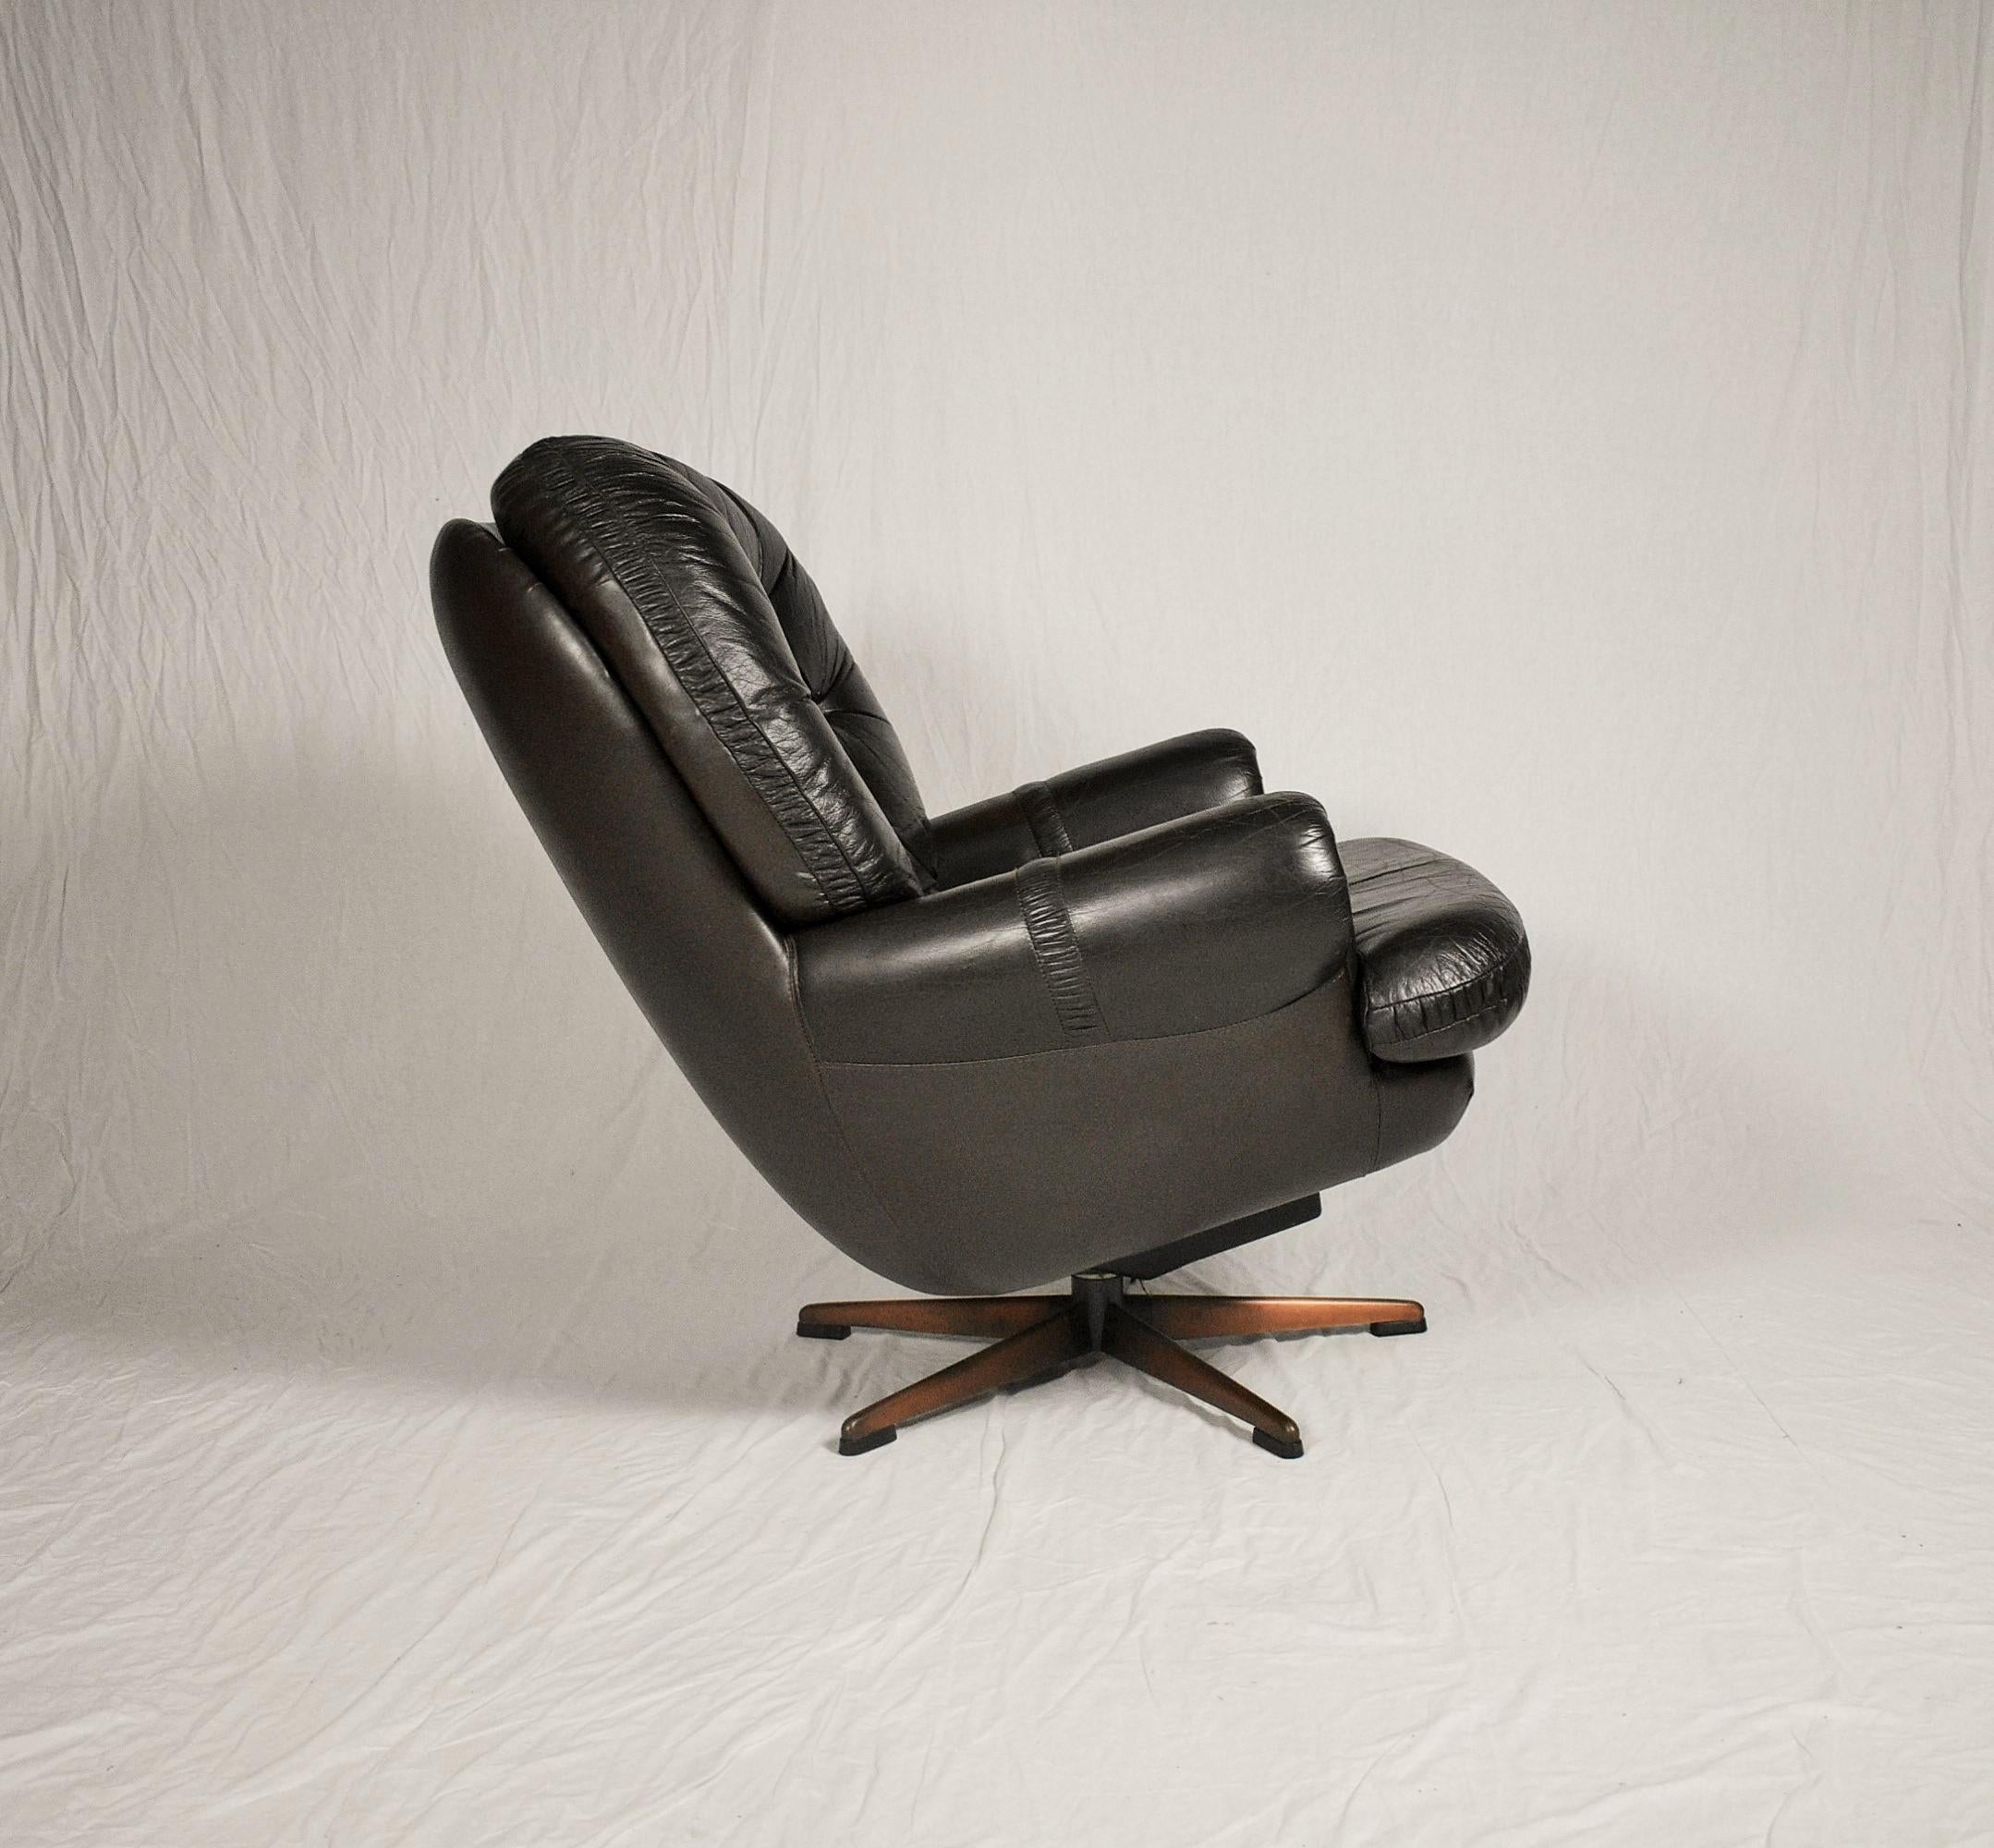 Late 20th Century Midcentury Finland Leather Swivel Armchair by Peem, 1970s For Sale